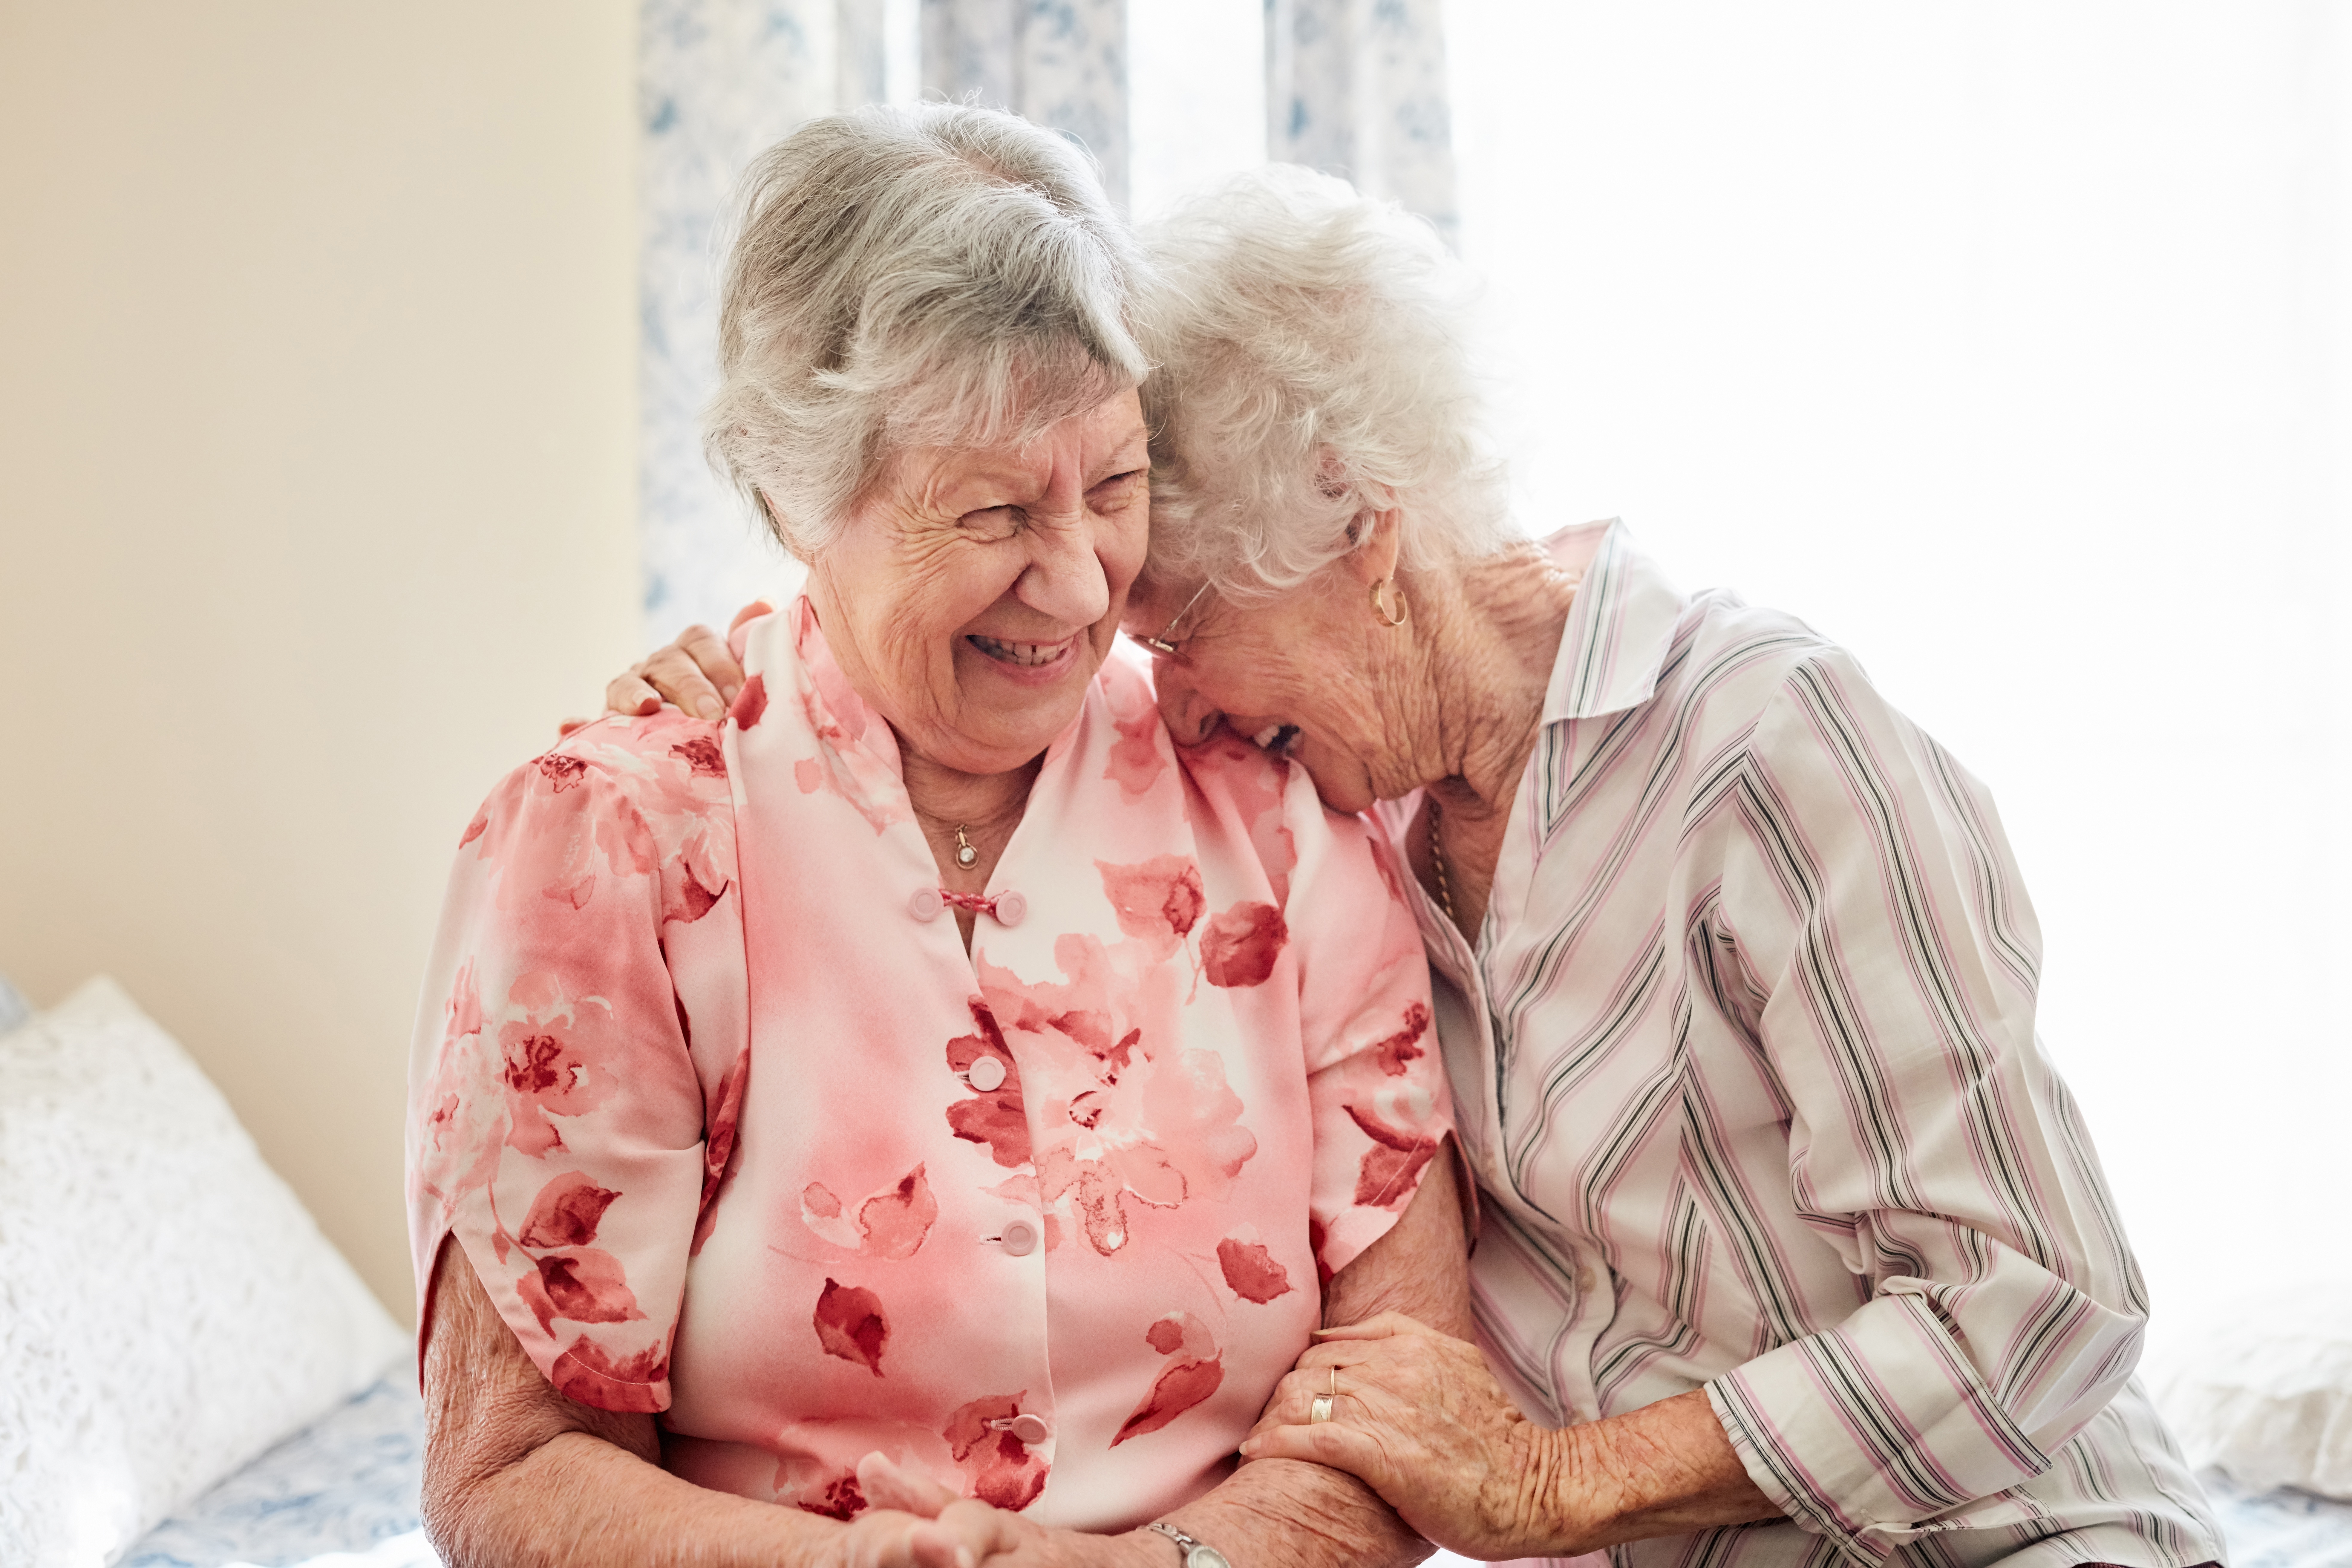 “Sharing a laugh, sharing support: Two senior women demonstrate the emotional connection and sense of community fostered by respite care.”